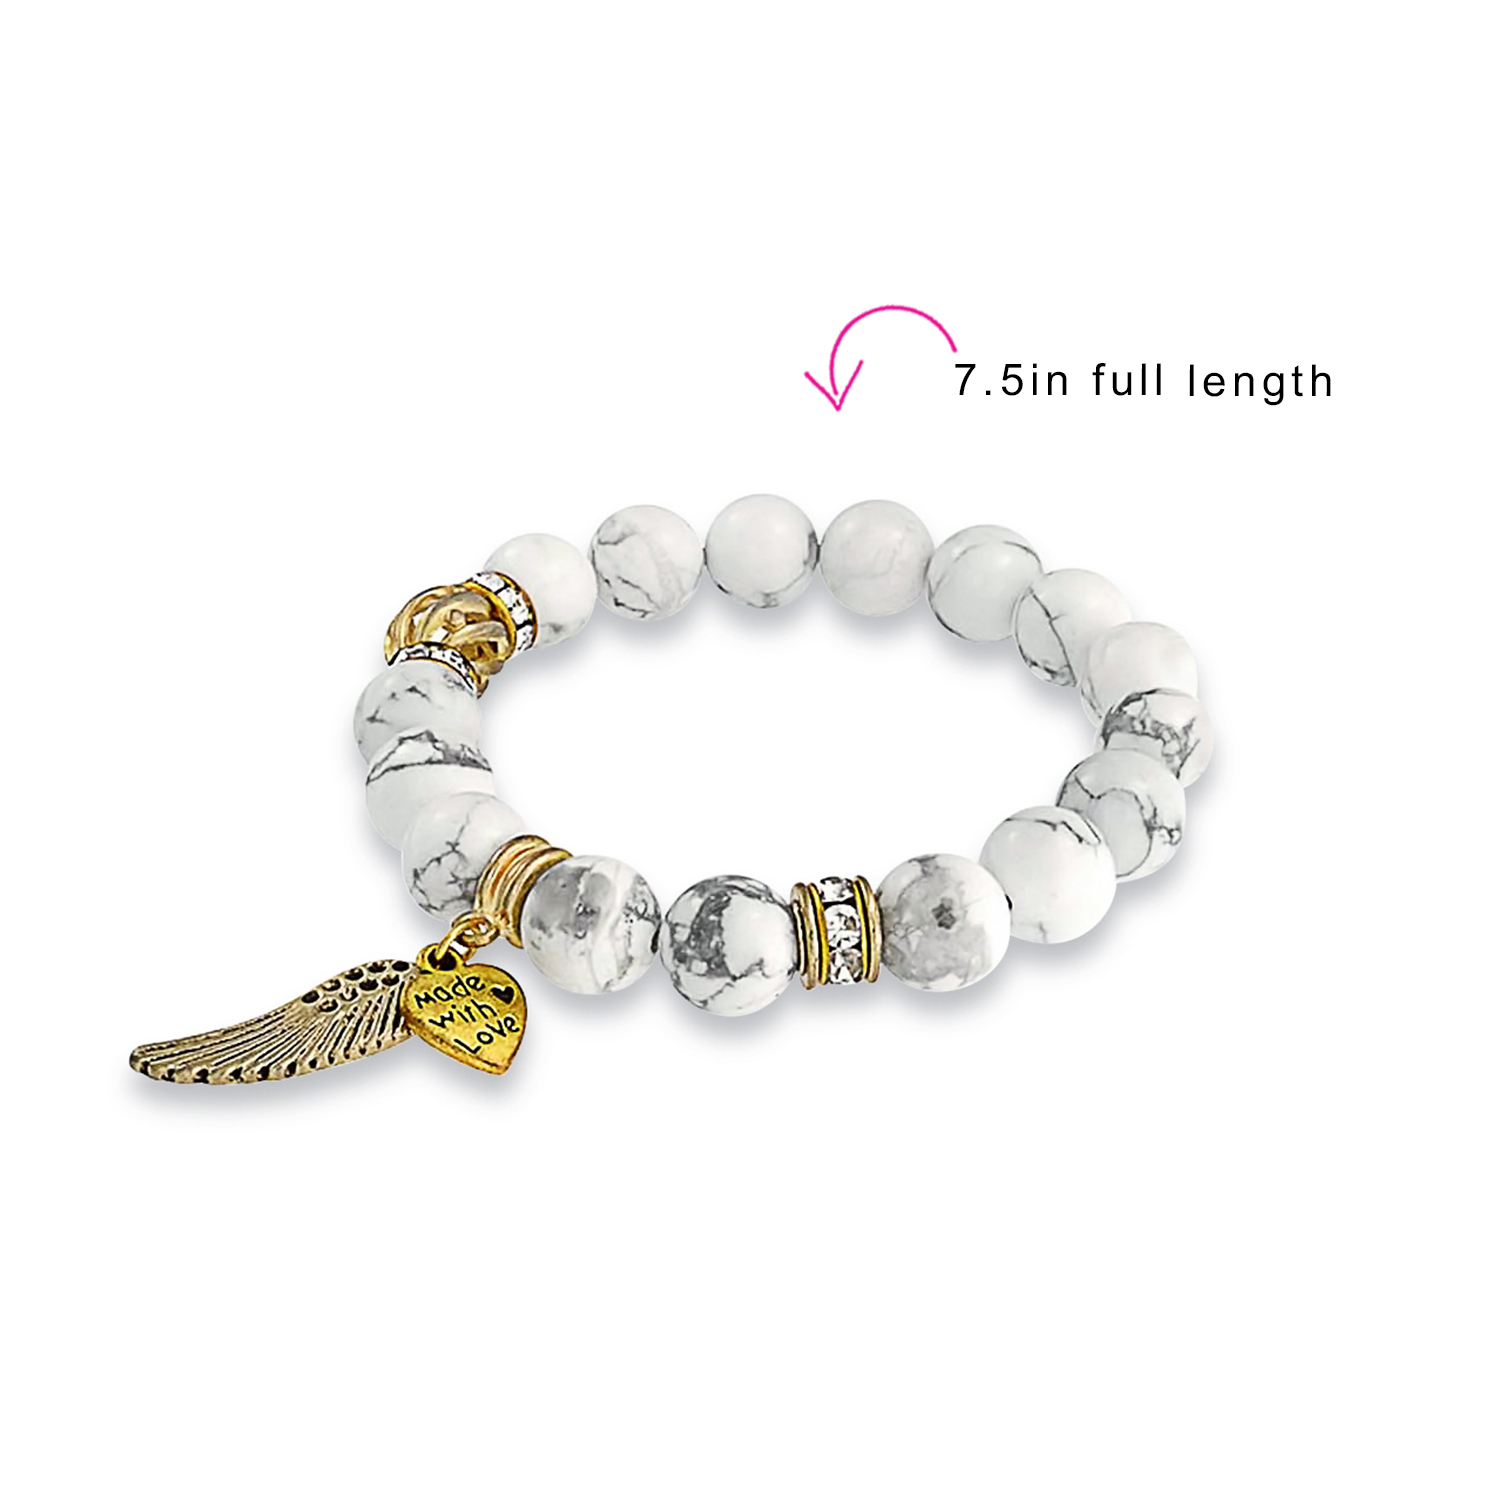 Bling Jewelry White Angel Wing Charm Stretch Bracelet Bead Howlite Charm Gold Plated - image 3 of 6